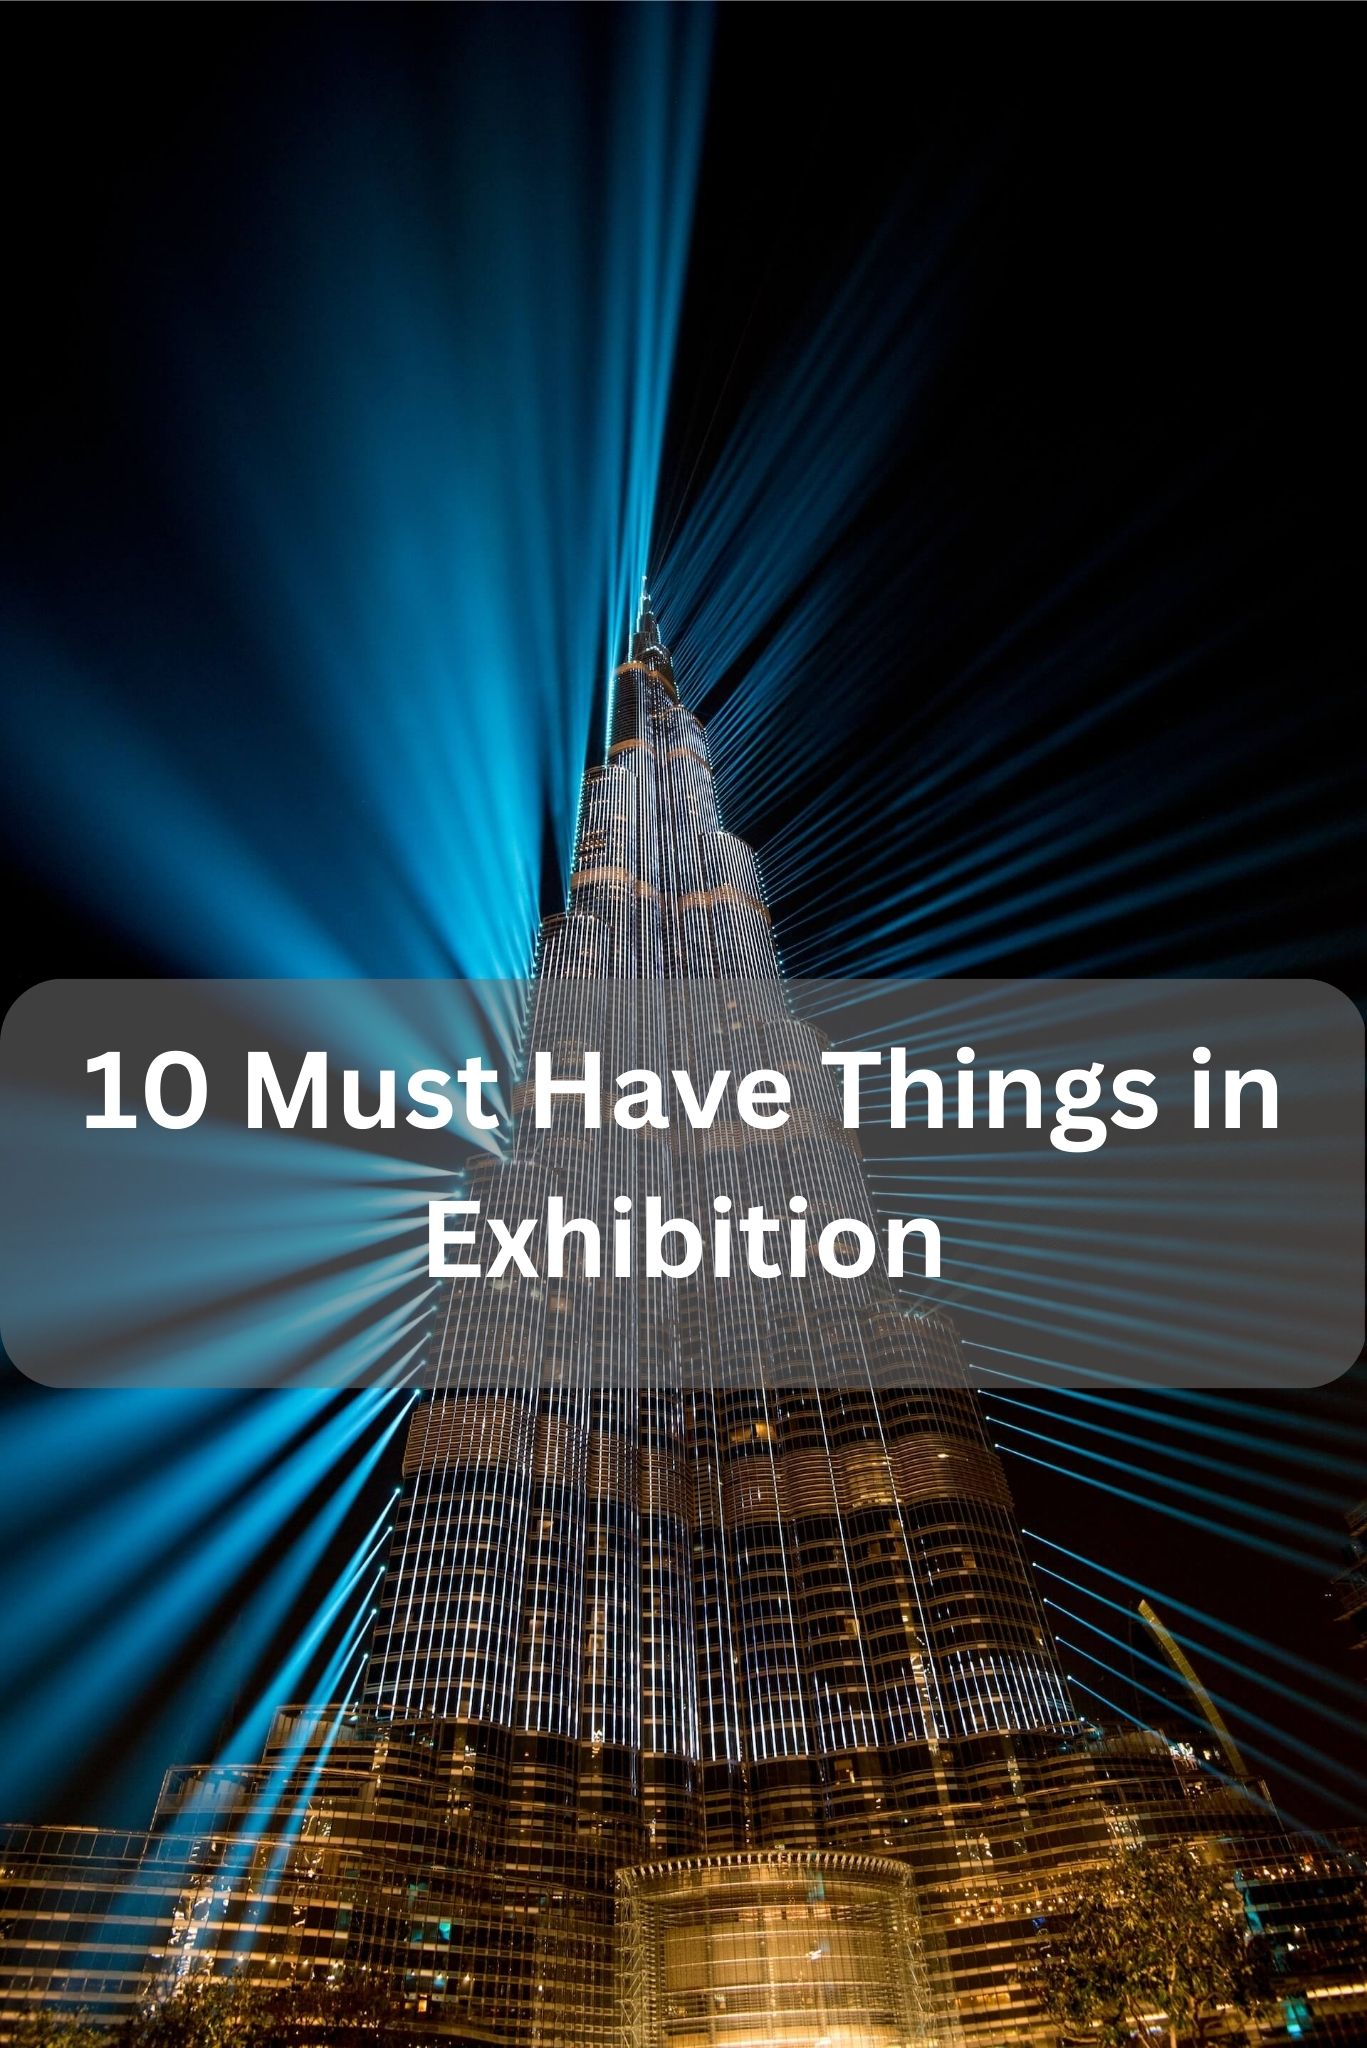 10 Must Have Things in Exhibition